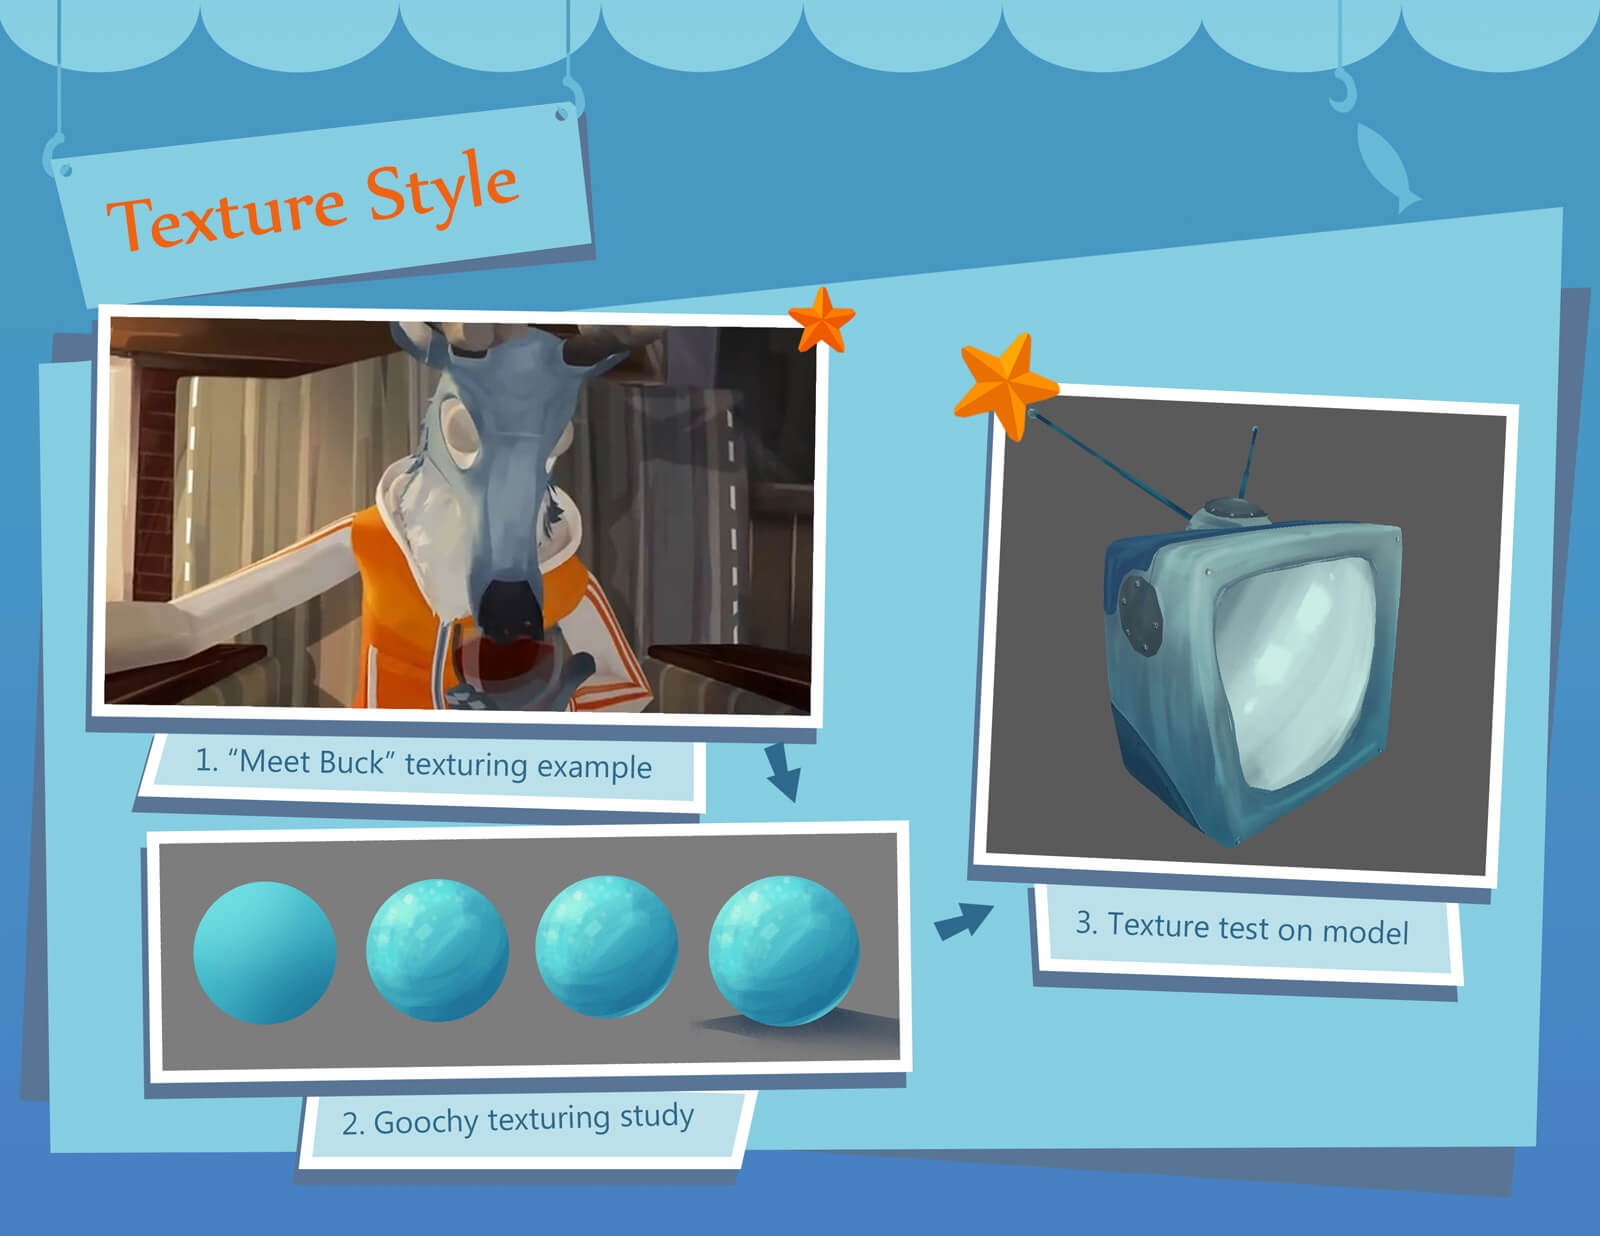 Presentation slide for the film Bait &amp; Switch depicting the style of texturing used for various objects